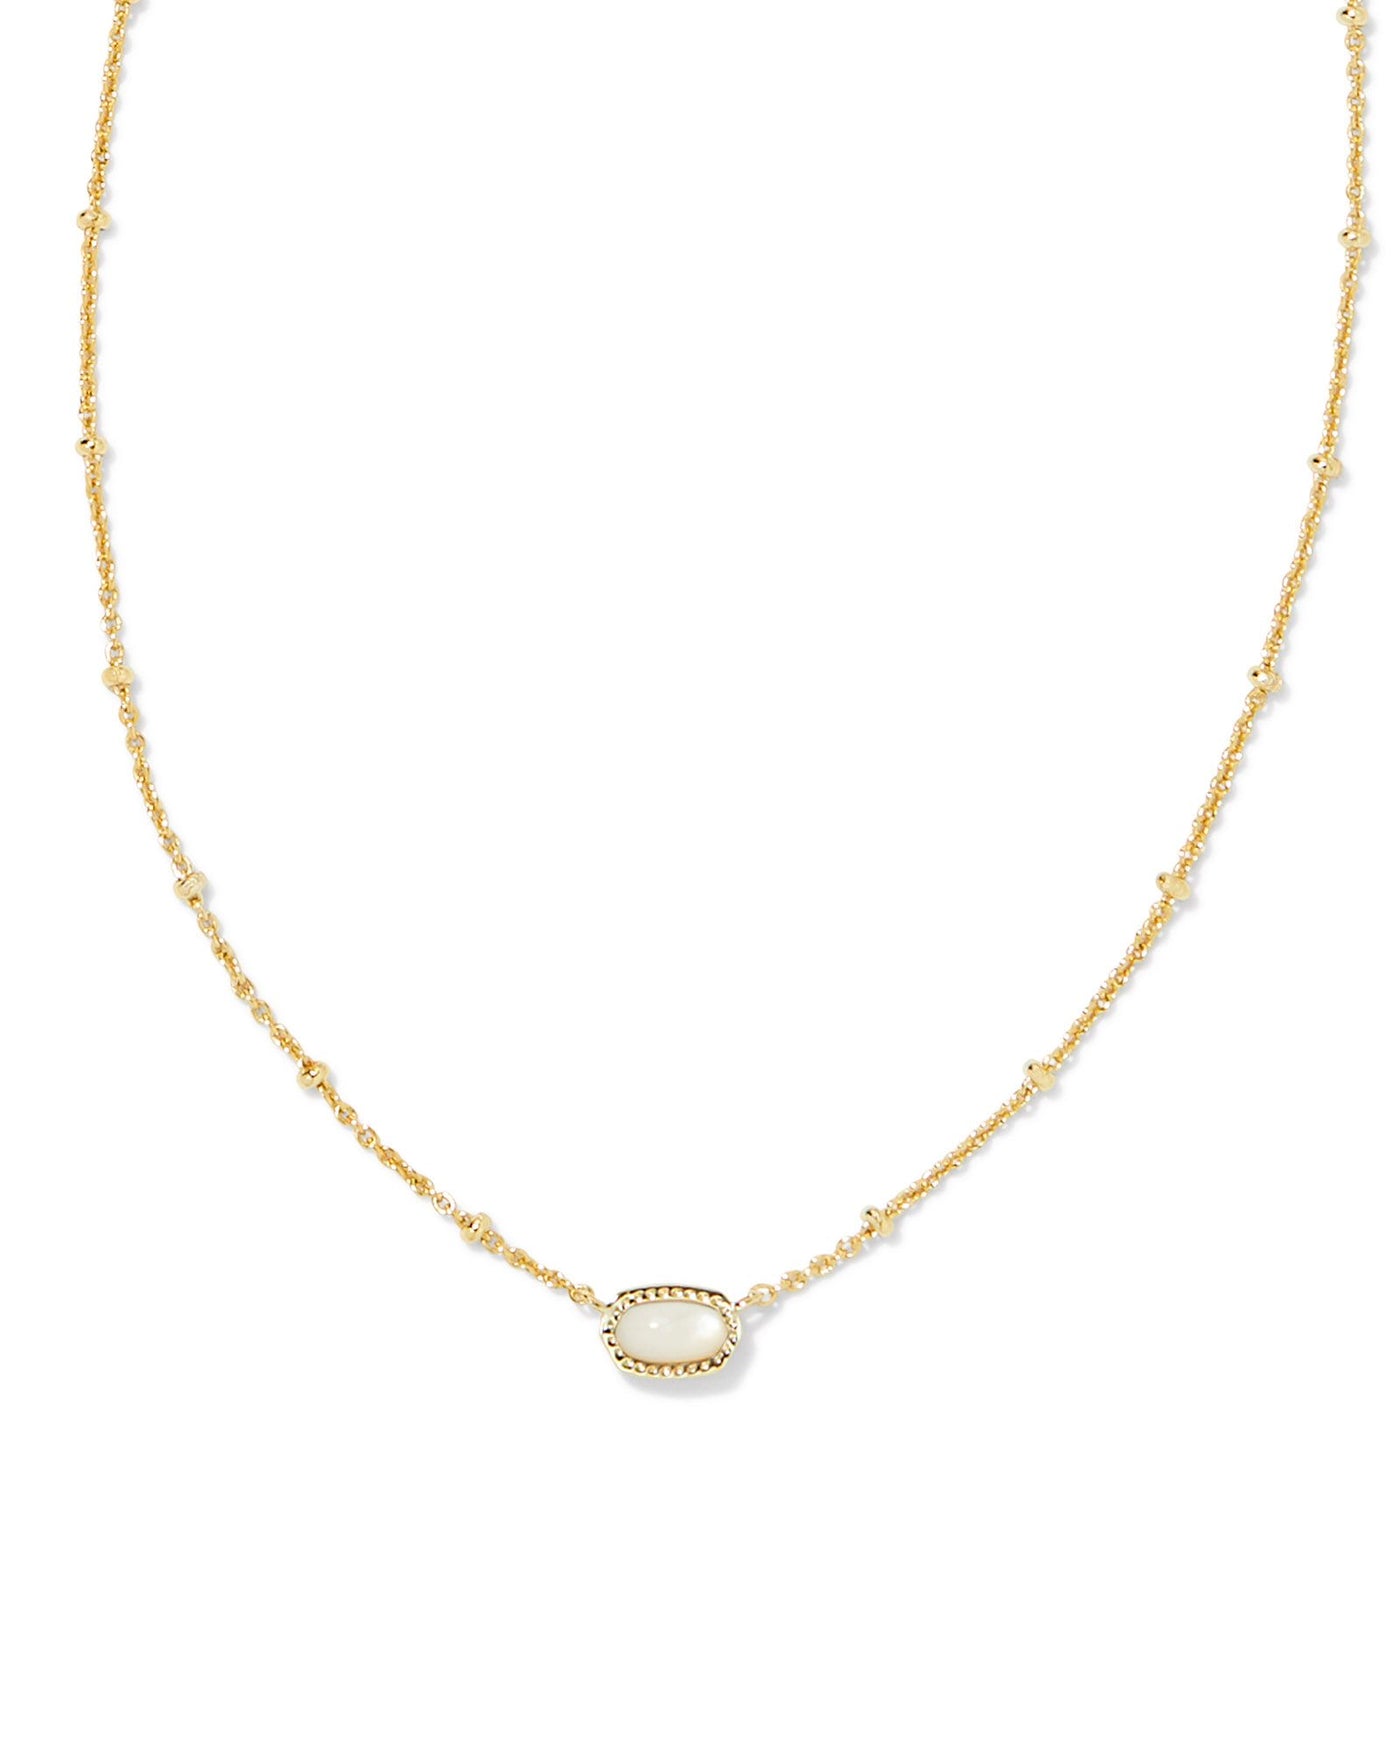 Kendra Scott Mini Elisa Satellite Necklace in Gold Ivory Mother of Pearl on white background close up.